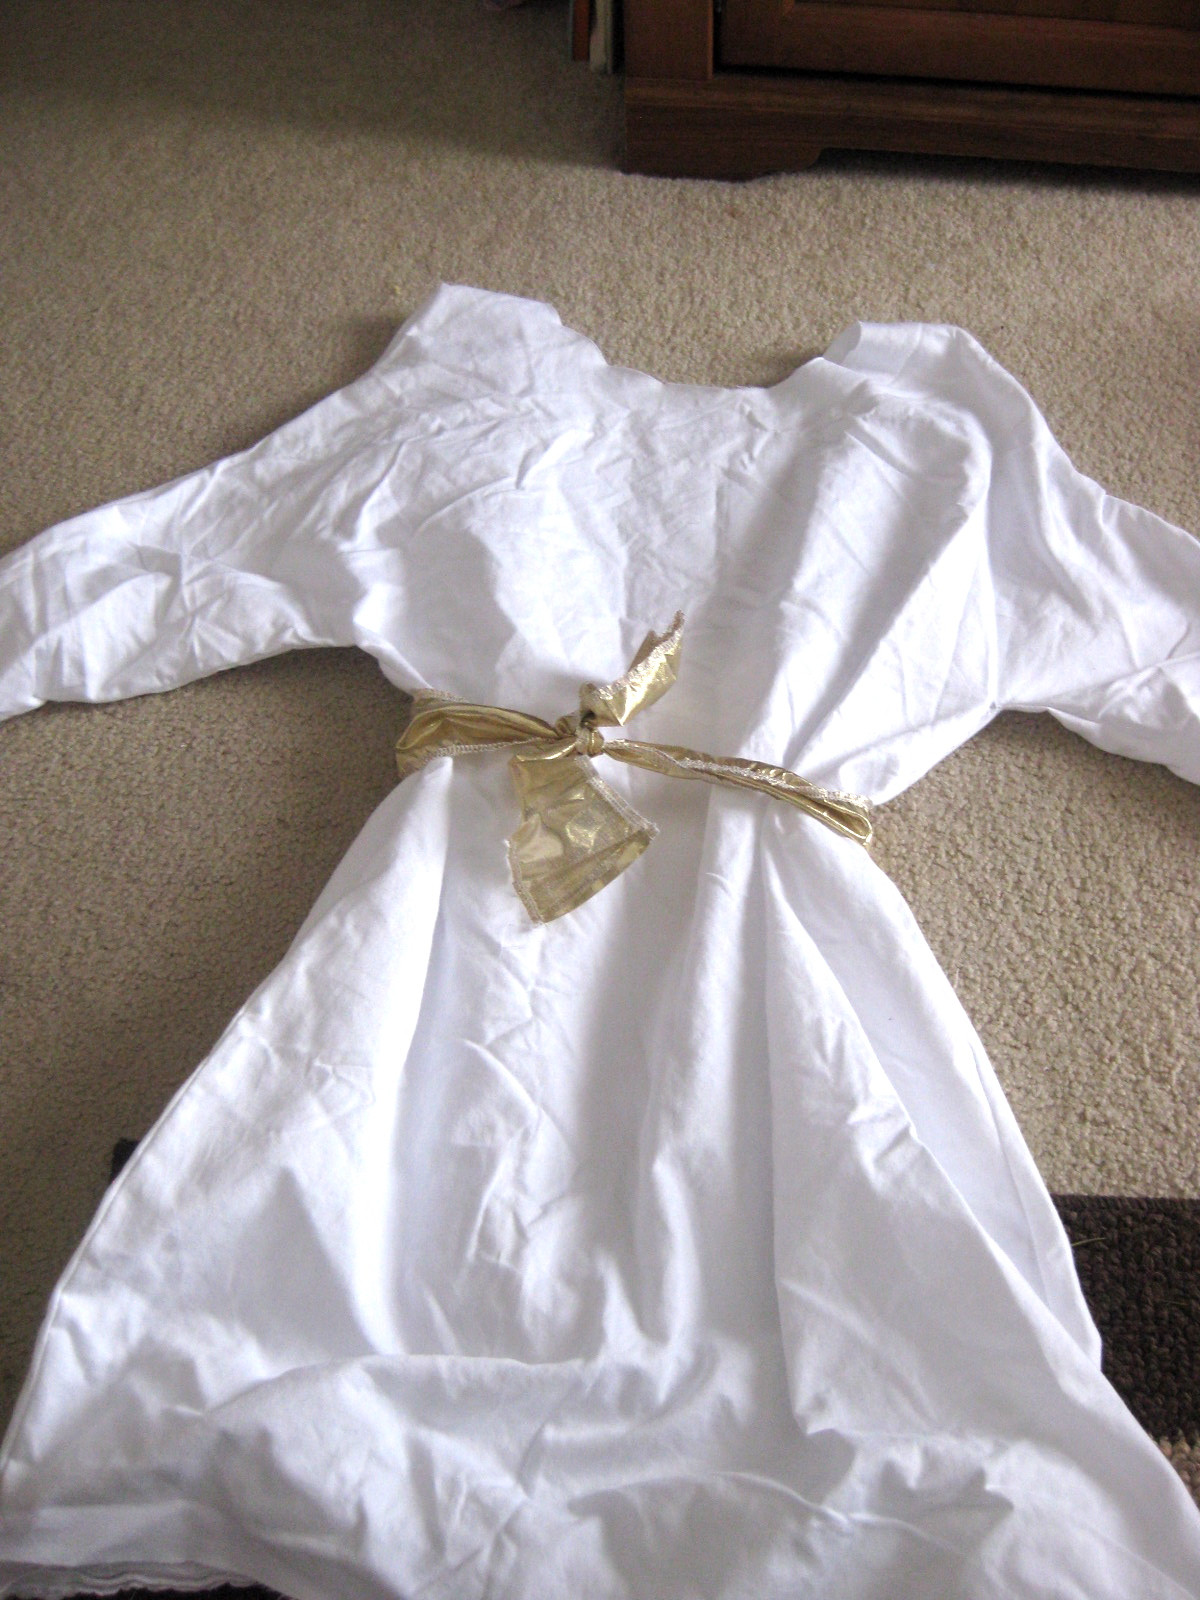 DIY Angel Costume
 This Little Project DIY Nativity Costumes DONKEY and CAMEL